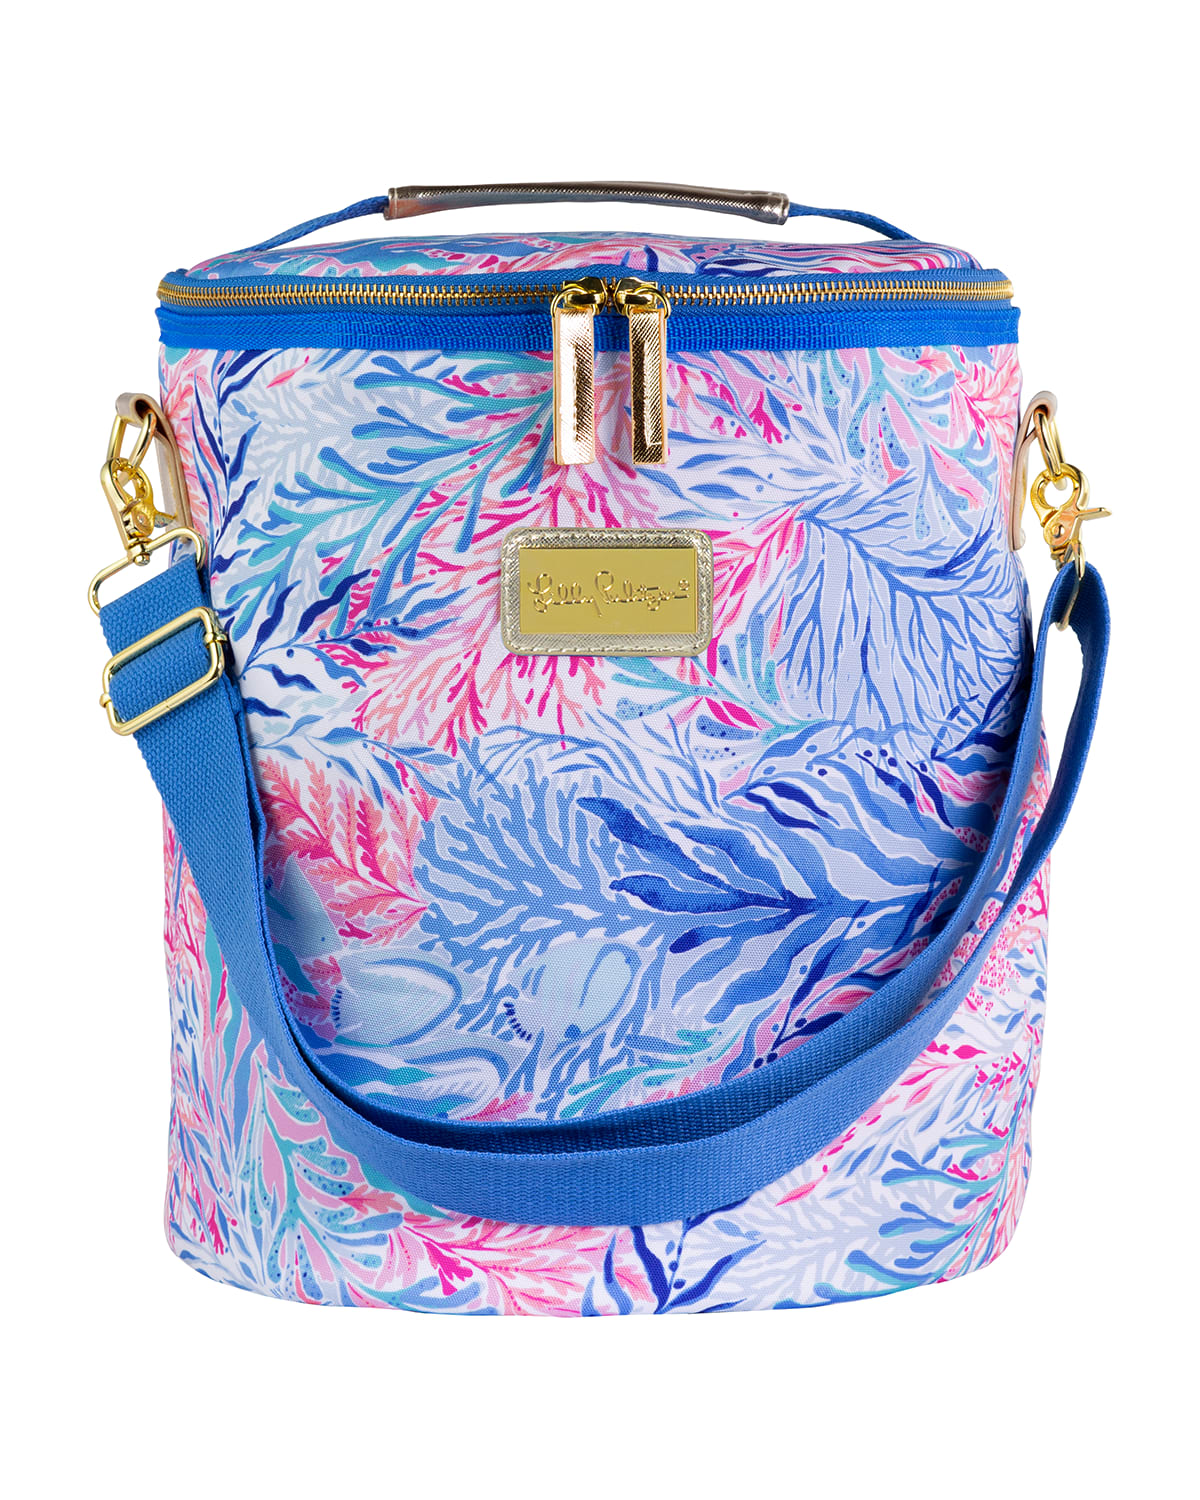 Lilly Pulitzer Kaleidoscope Coral Beach Cooler